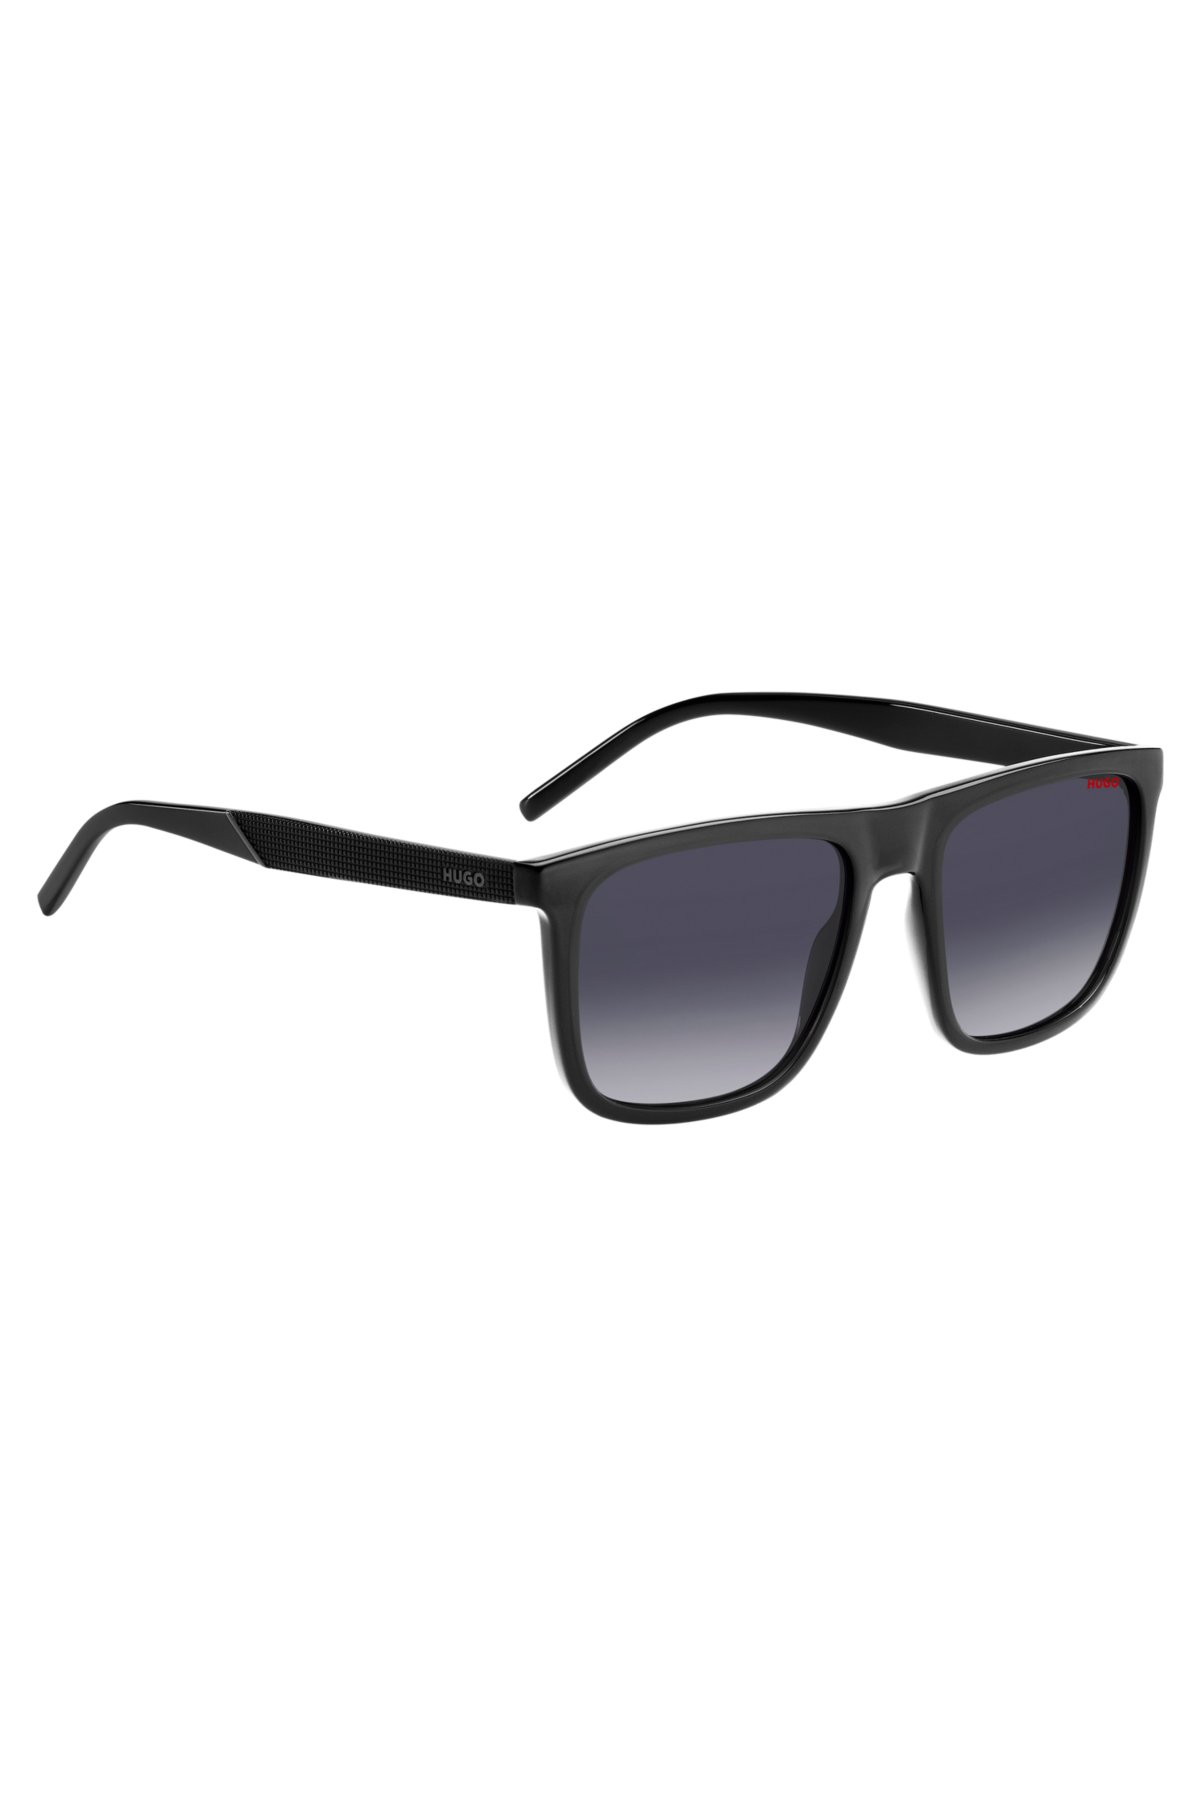 Black-acetate sunglasses with patterned temples, Grey